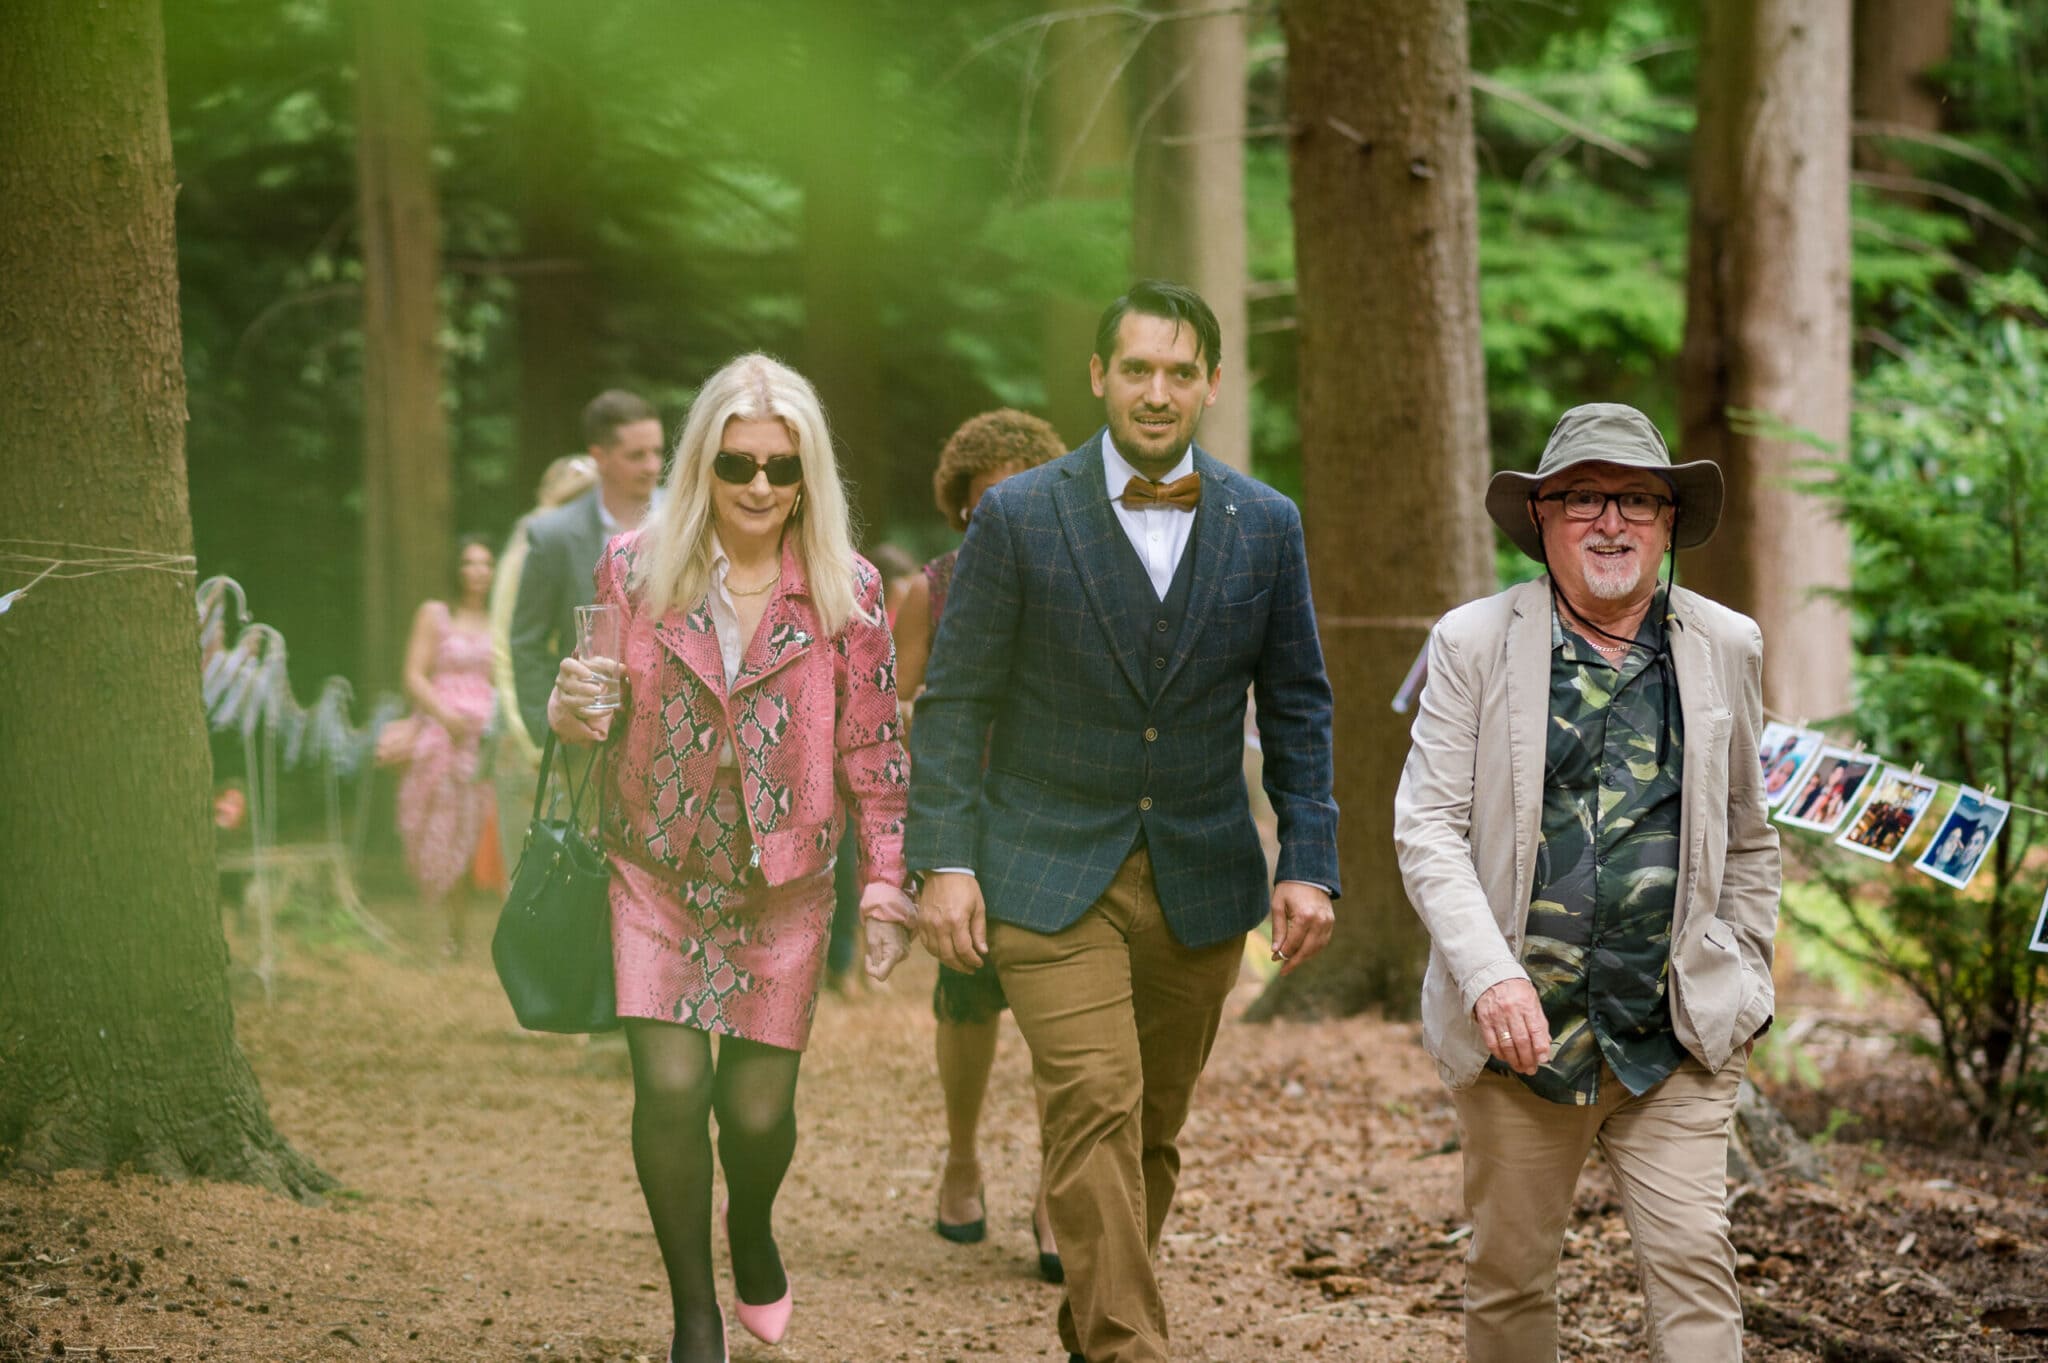 Guests arrive at Weddings in the Wood in Hampshire